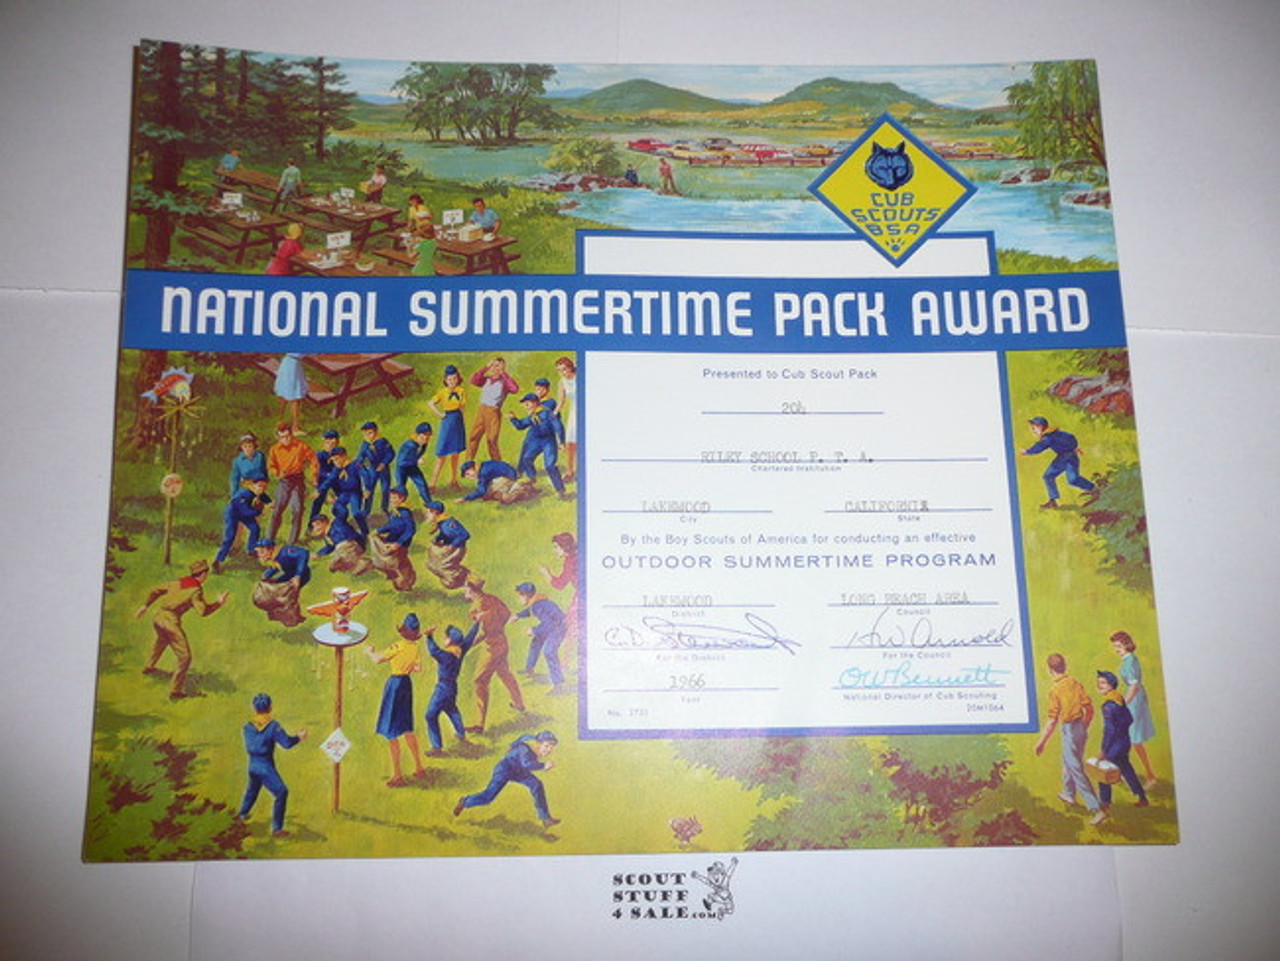 Copy of 1964-68 National Summertime Pack Award Certificate, presented